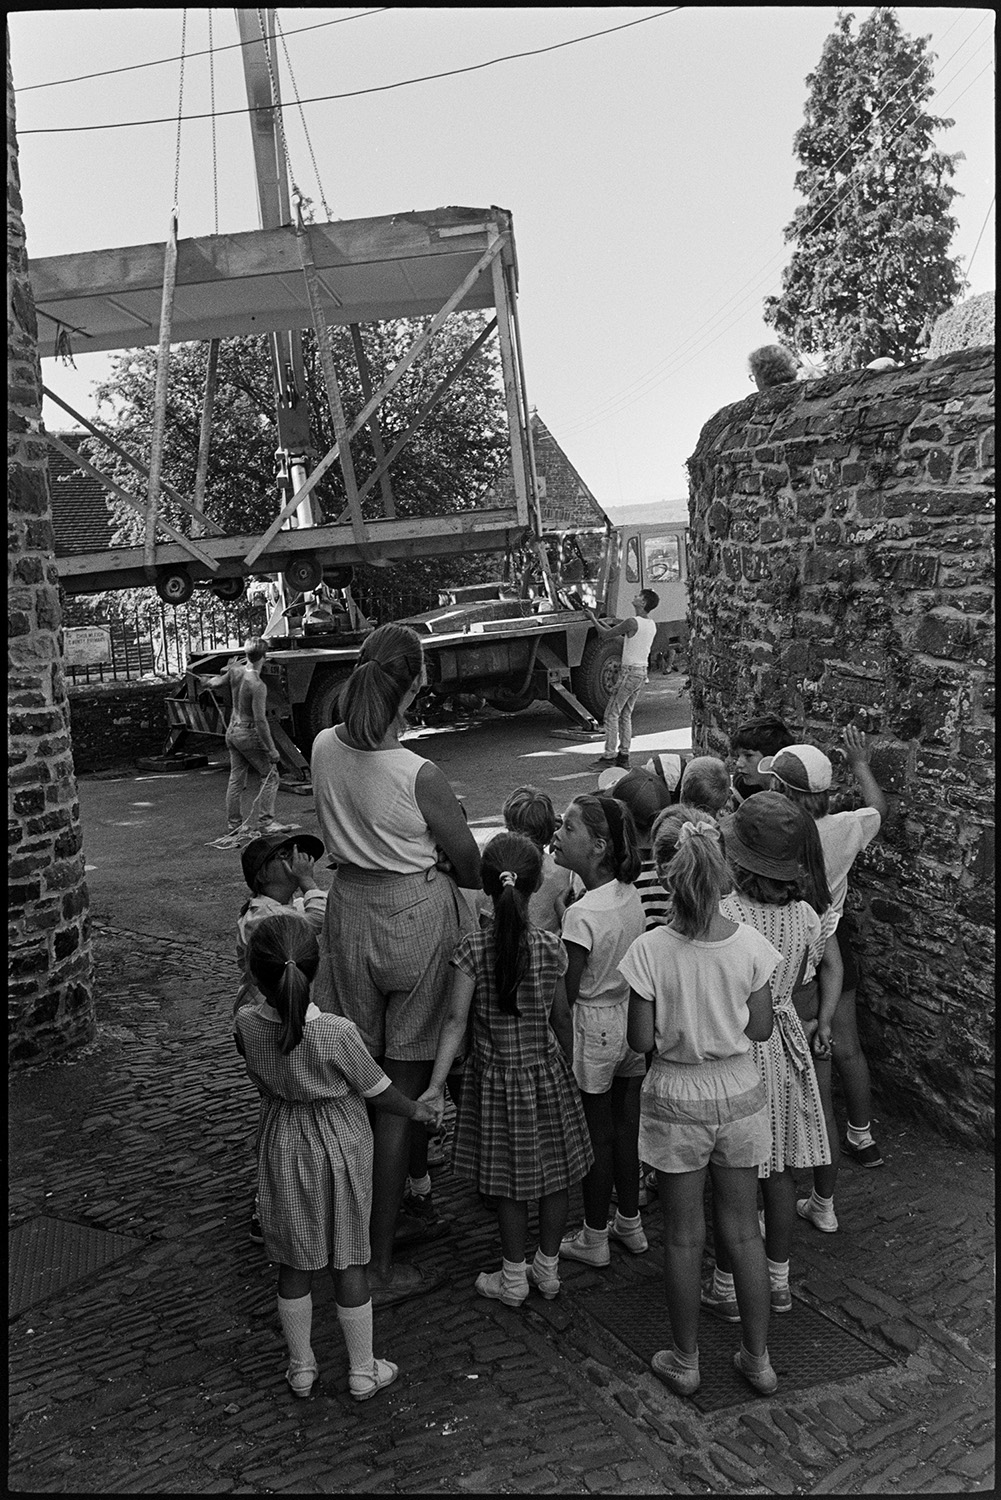 Children watching crane remove portacabin school building.
[A group of children and a woman watching two men manoeuvring the frame of a portacabin being hoisted by crane on to a lorry. The portacabin was previously used as a school building.]